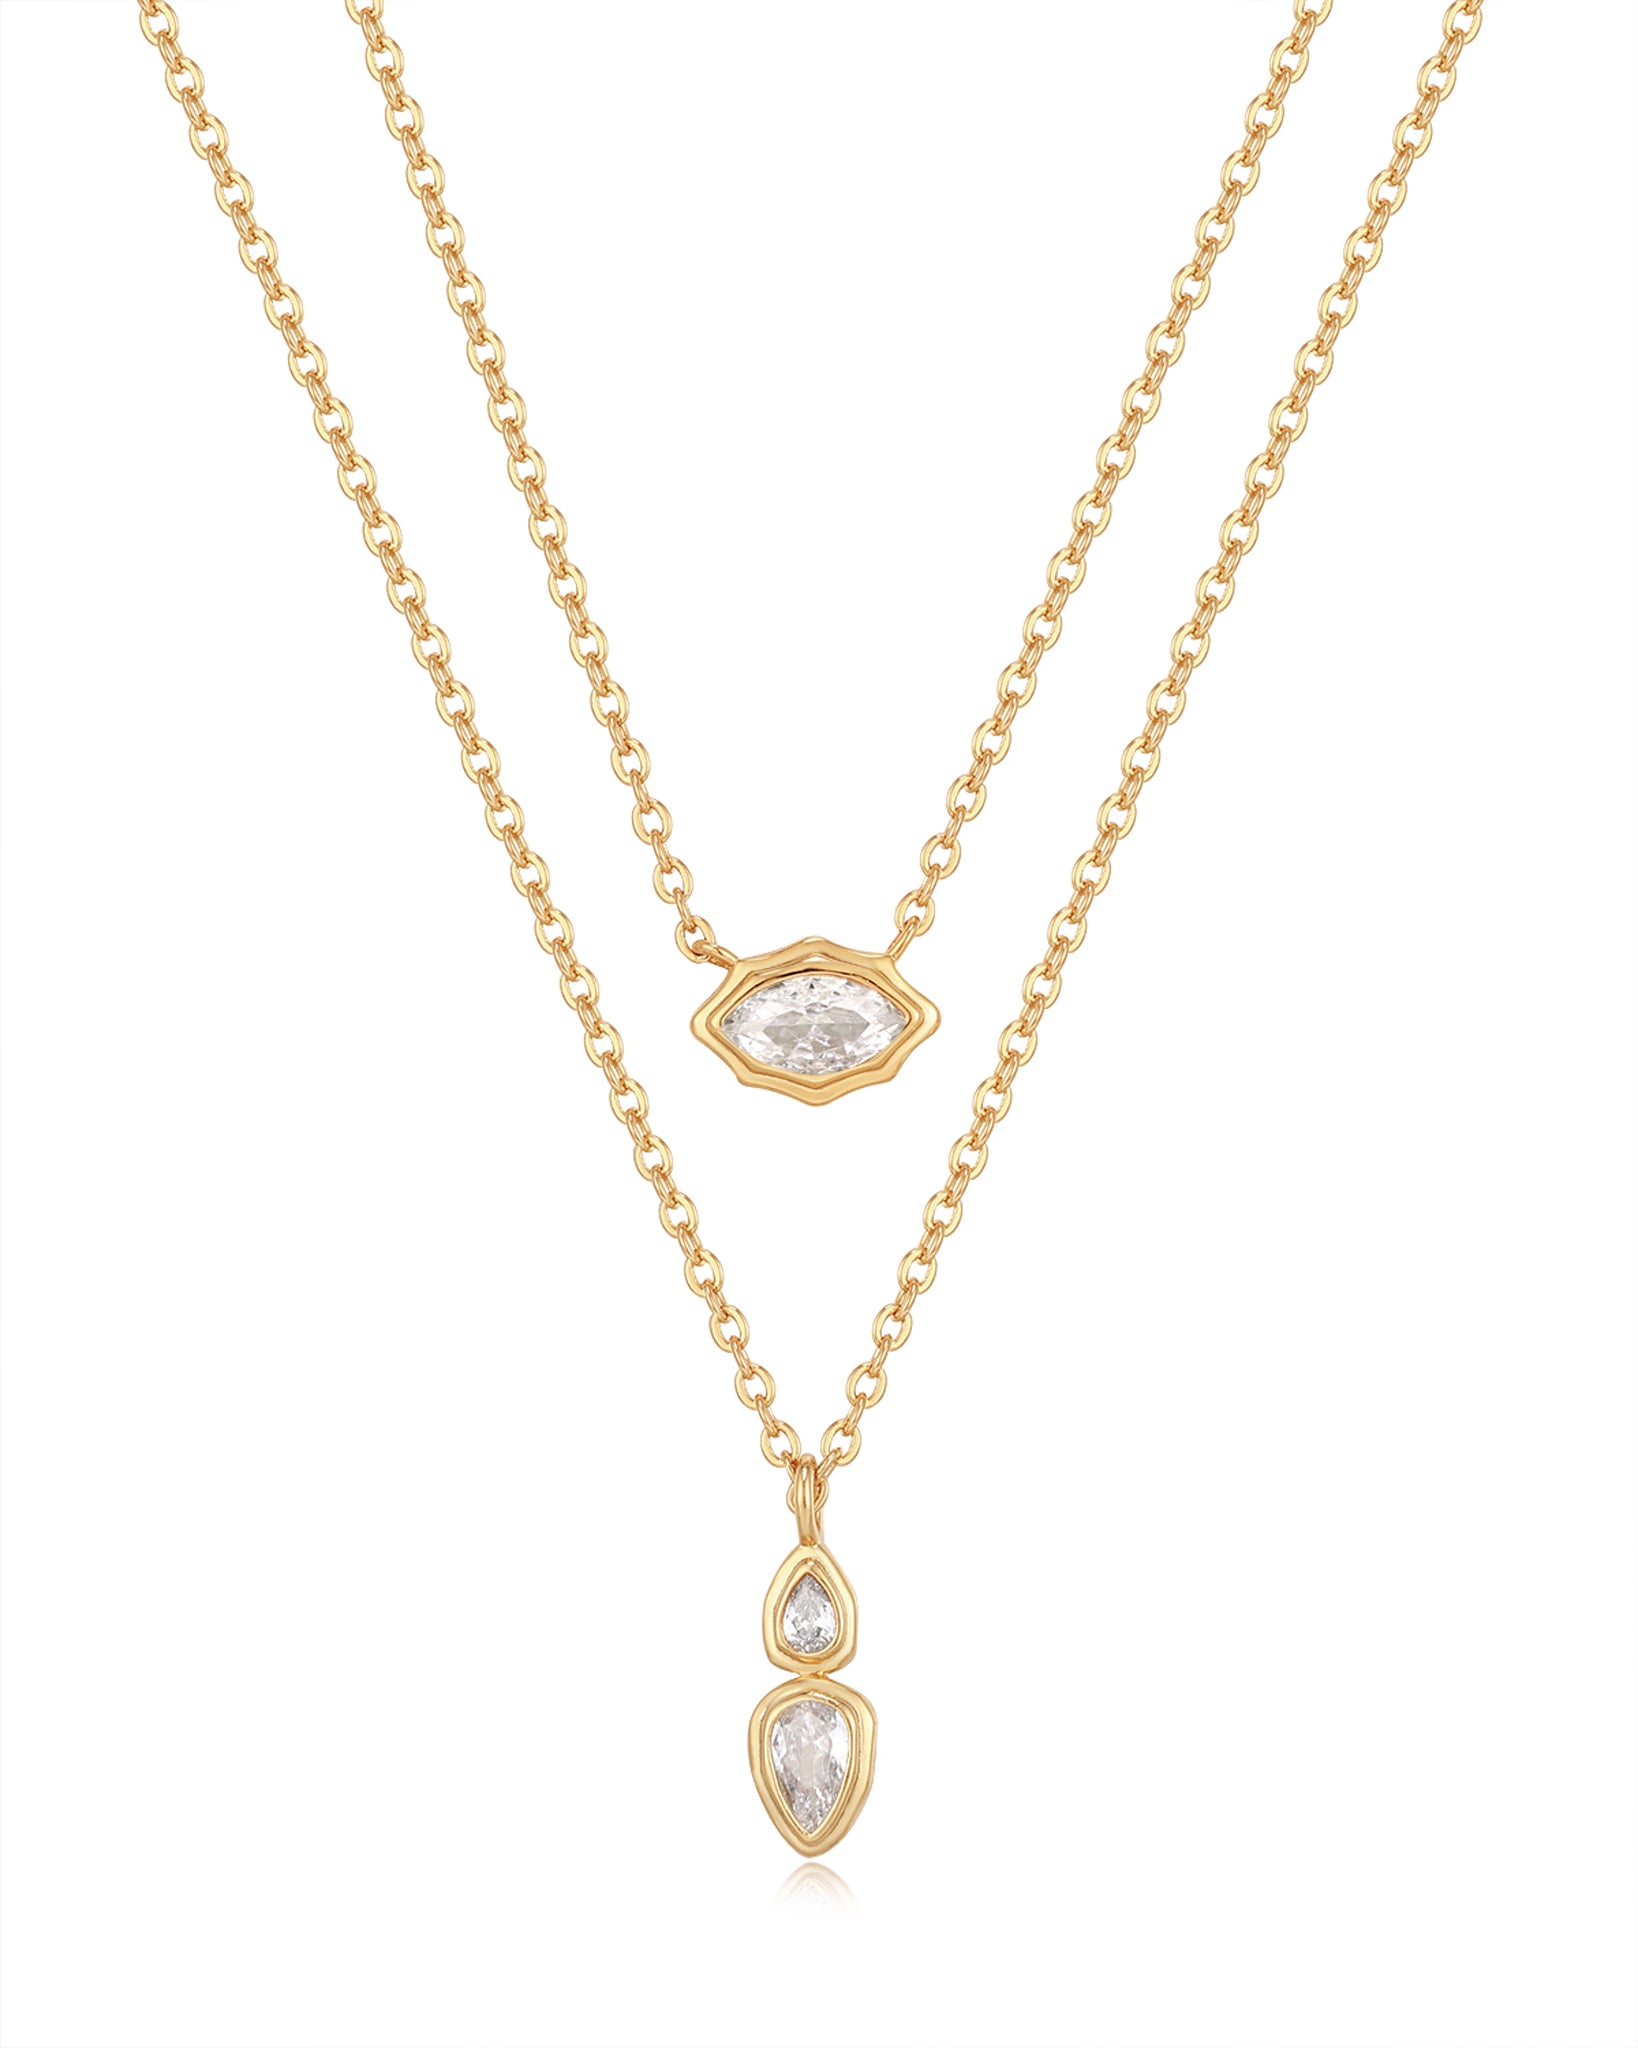 Luv Aj Stellar Bezel Charm Necklace Set in CZ and Polished Gold Plated